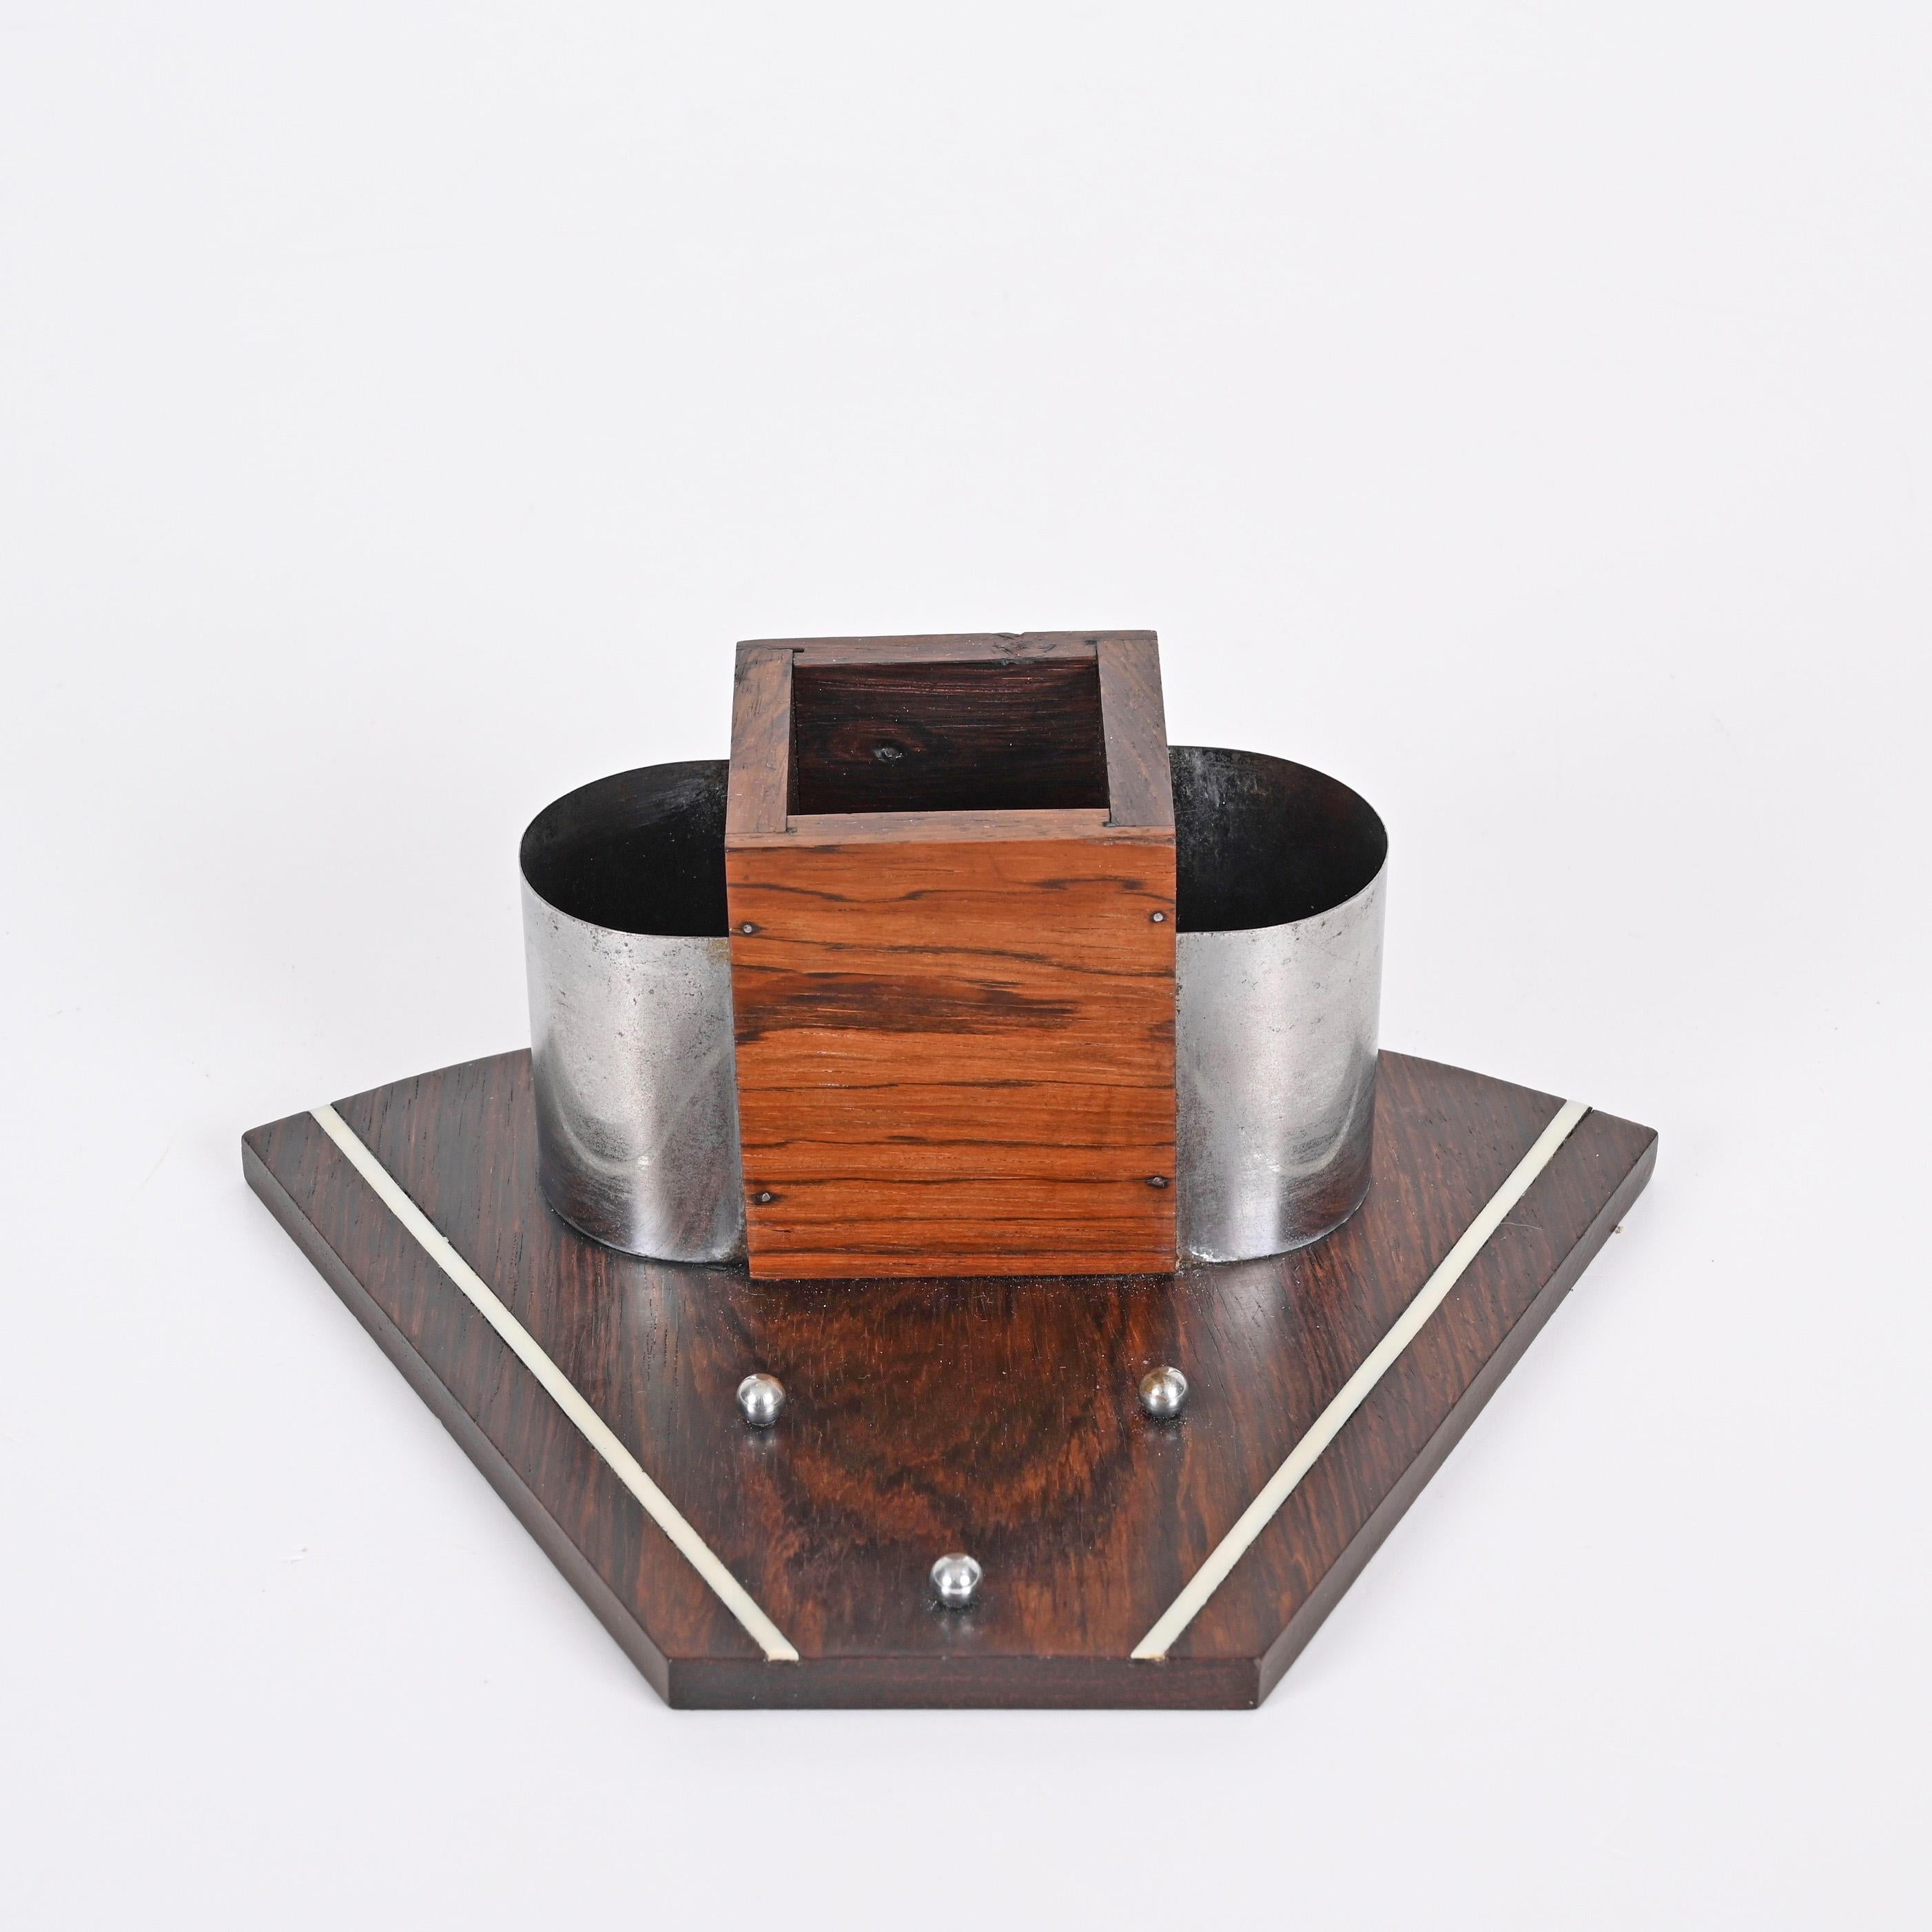 Art Deco Pen Holder in Macassar Wood, Italy Desk Accessory from the 1930s For Sale 7